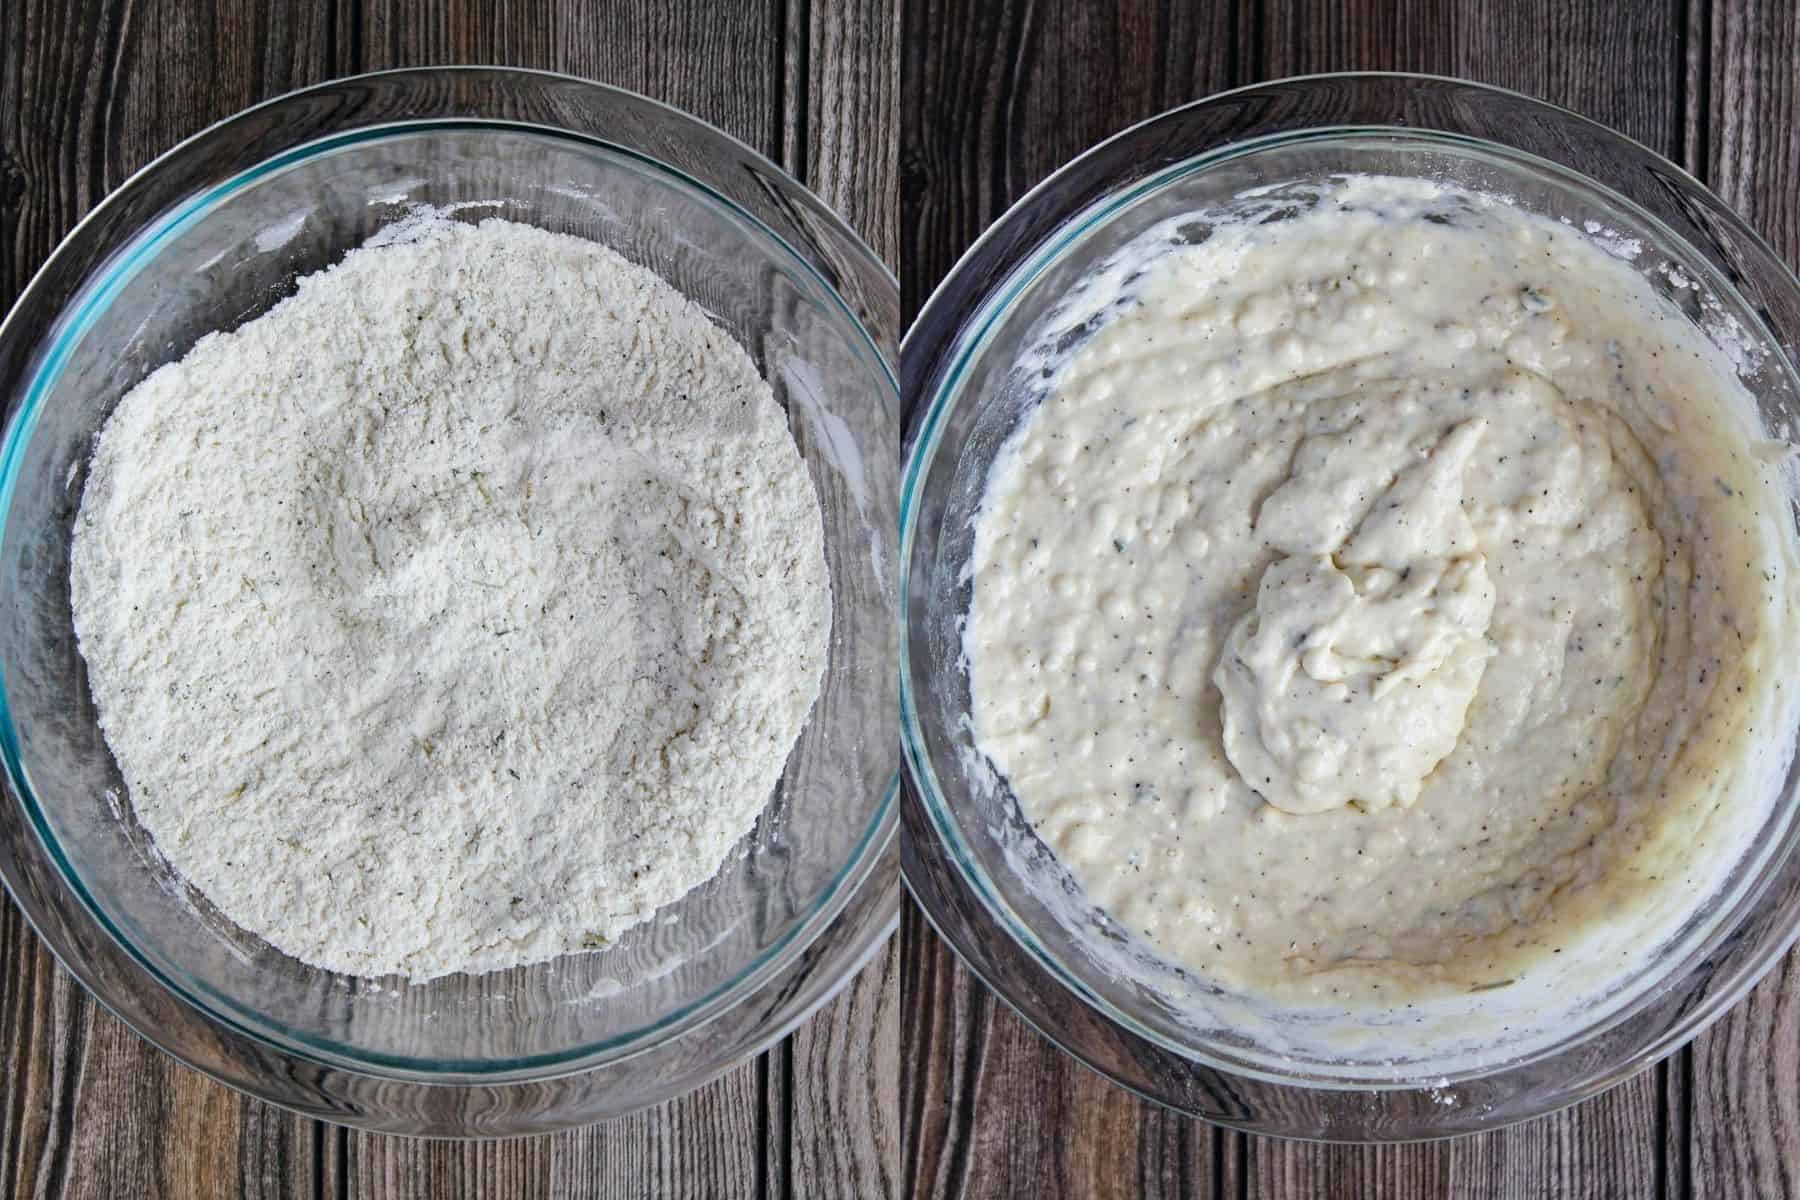 Flour mixture and batter mixture side by side.